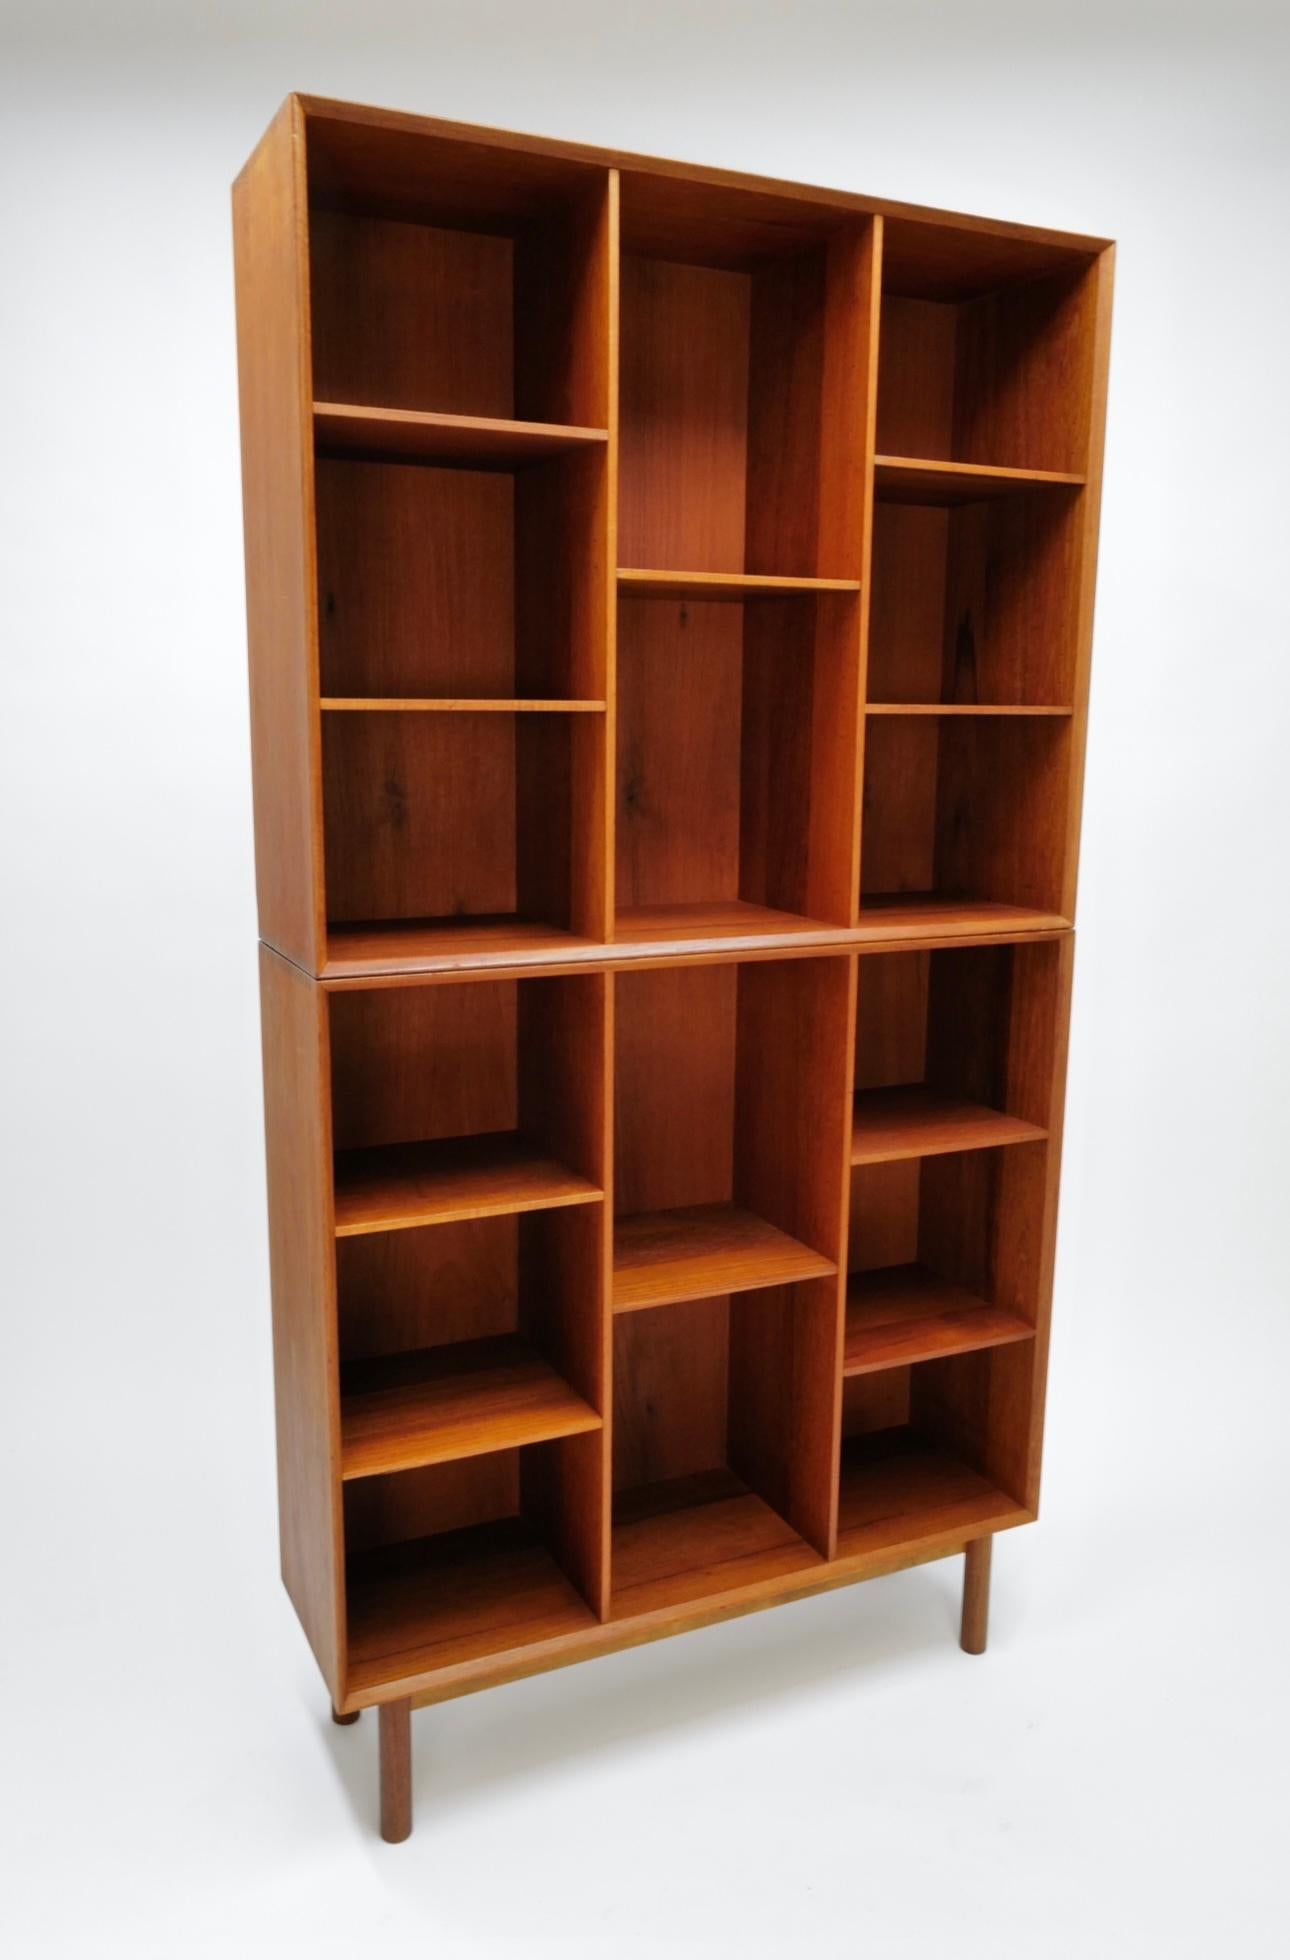 The two-piece stacking teak bookcase by Peter Hvidt and Orla Mølgaard-Nielsen for John Stuart Inc. epitomizes a harmonious blend of form and functionality. Meticulously crafted from luxurious teak wood, this modular bookcase features two distinct